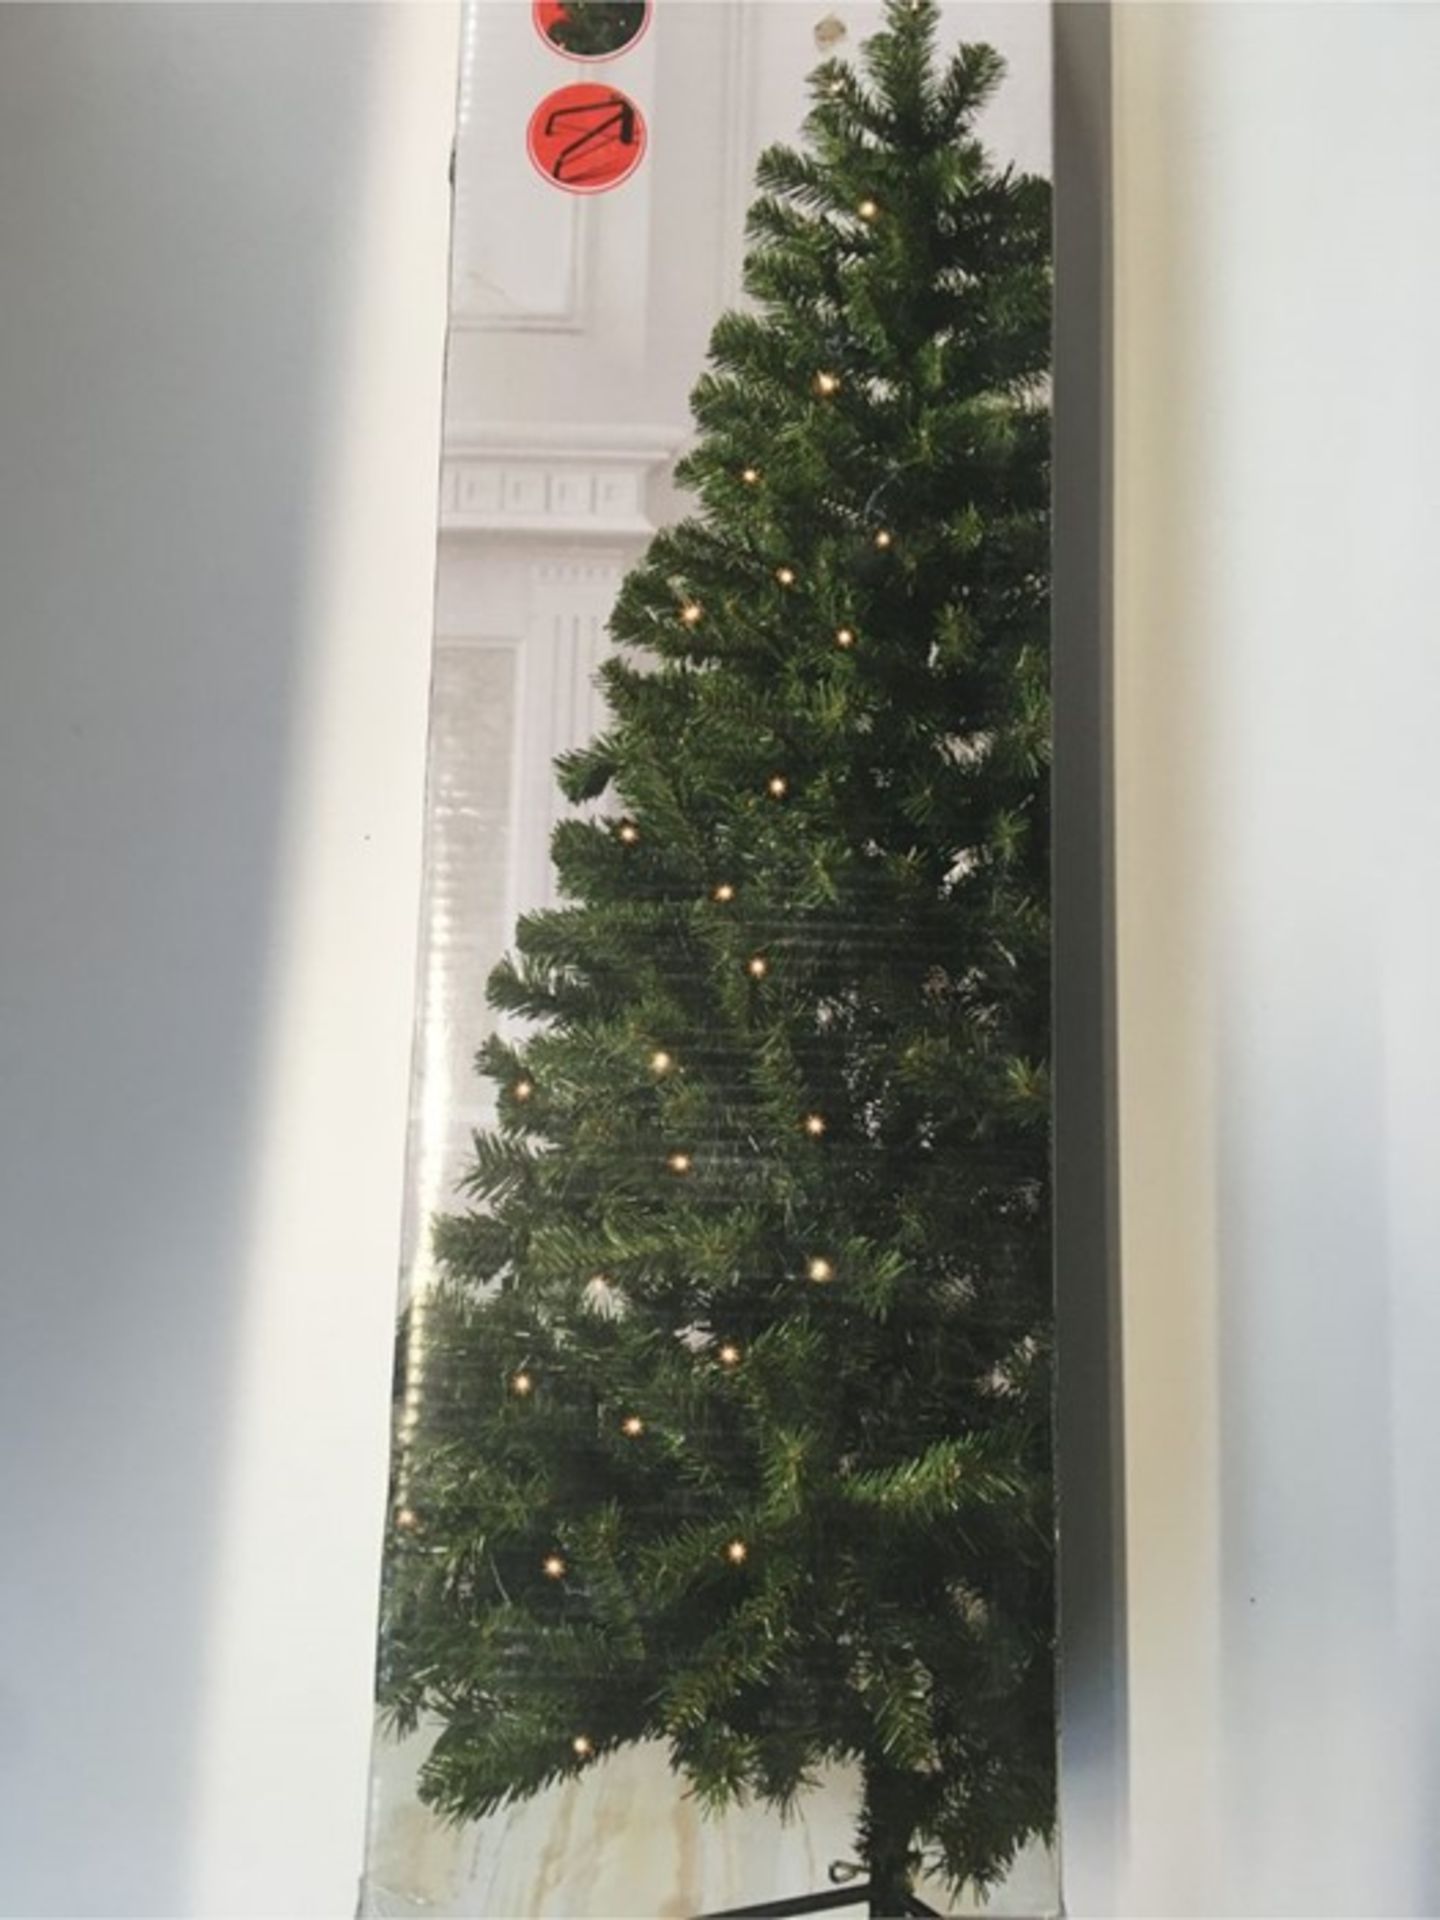 1 BOXED 6FT PRE LIT EVERGREEN CHRISTMAS TREE / RRP £89.95 (PUBLIC VIEWING AVAILABLE)